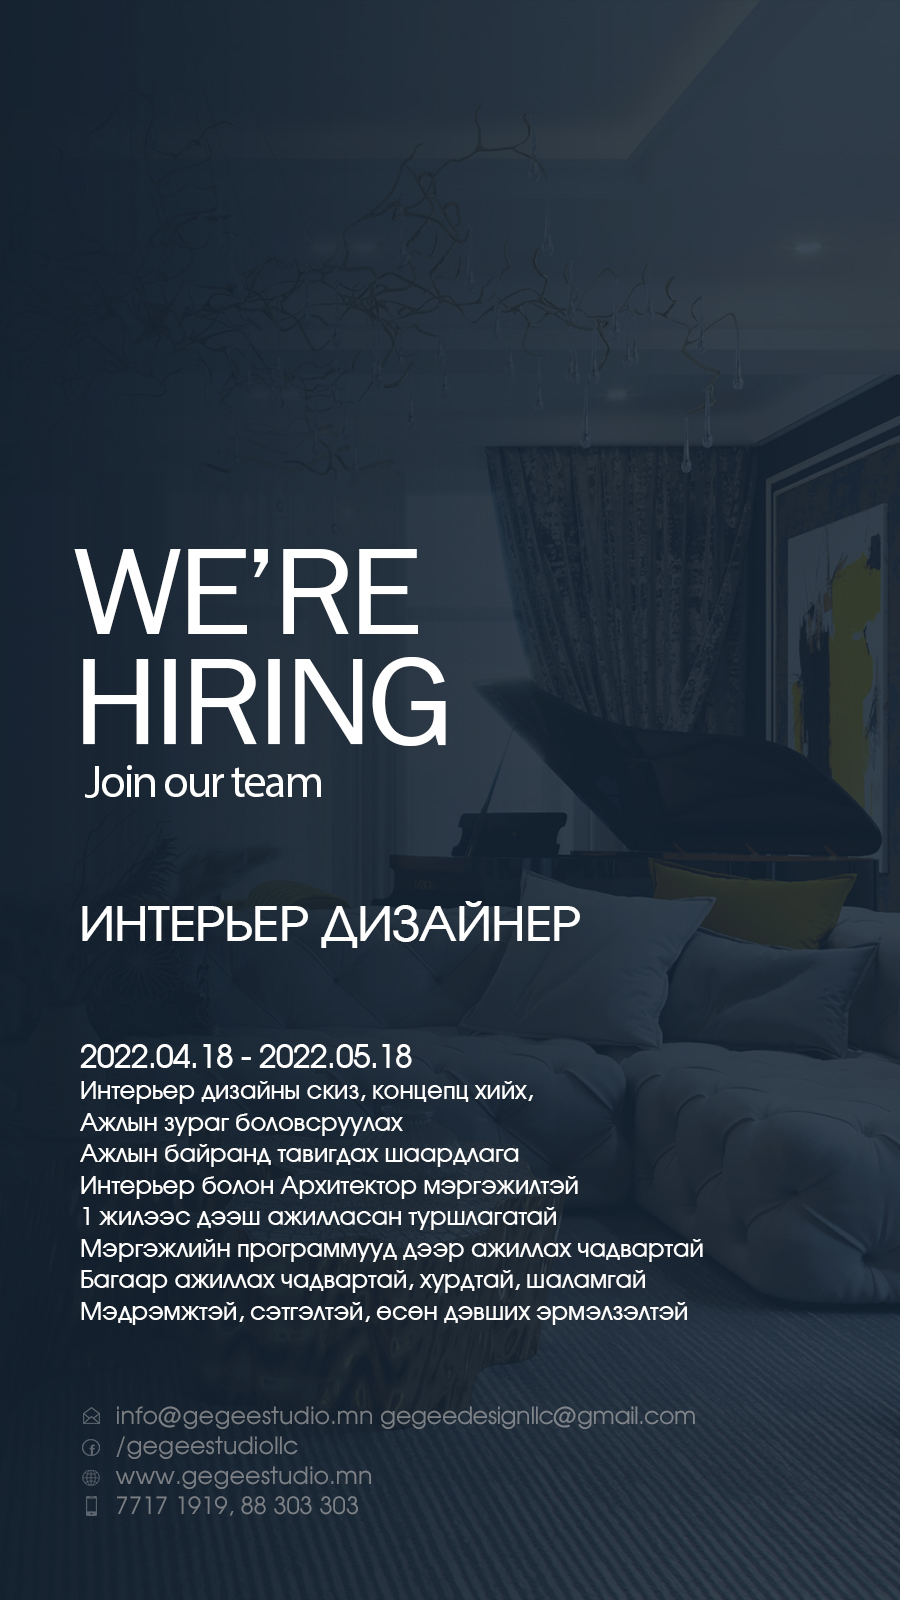 WE’RE HIRING join our team